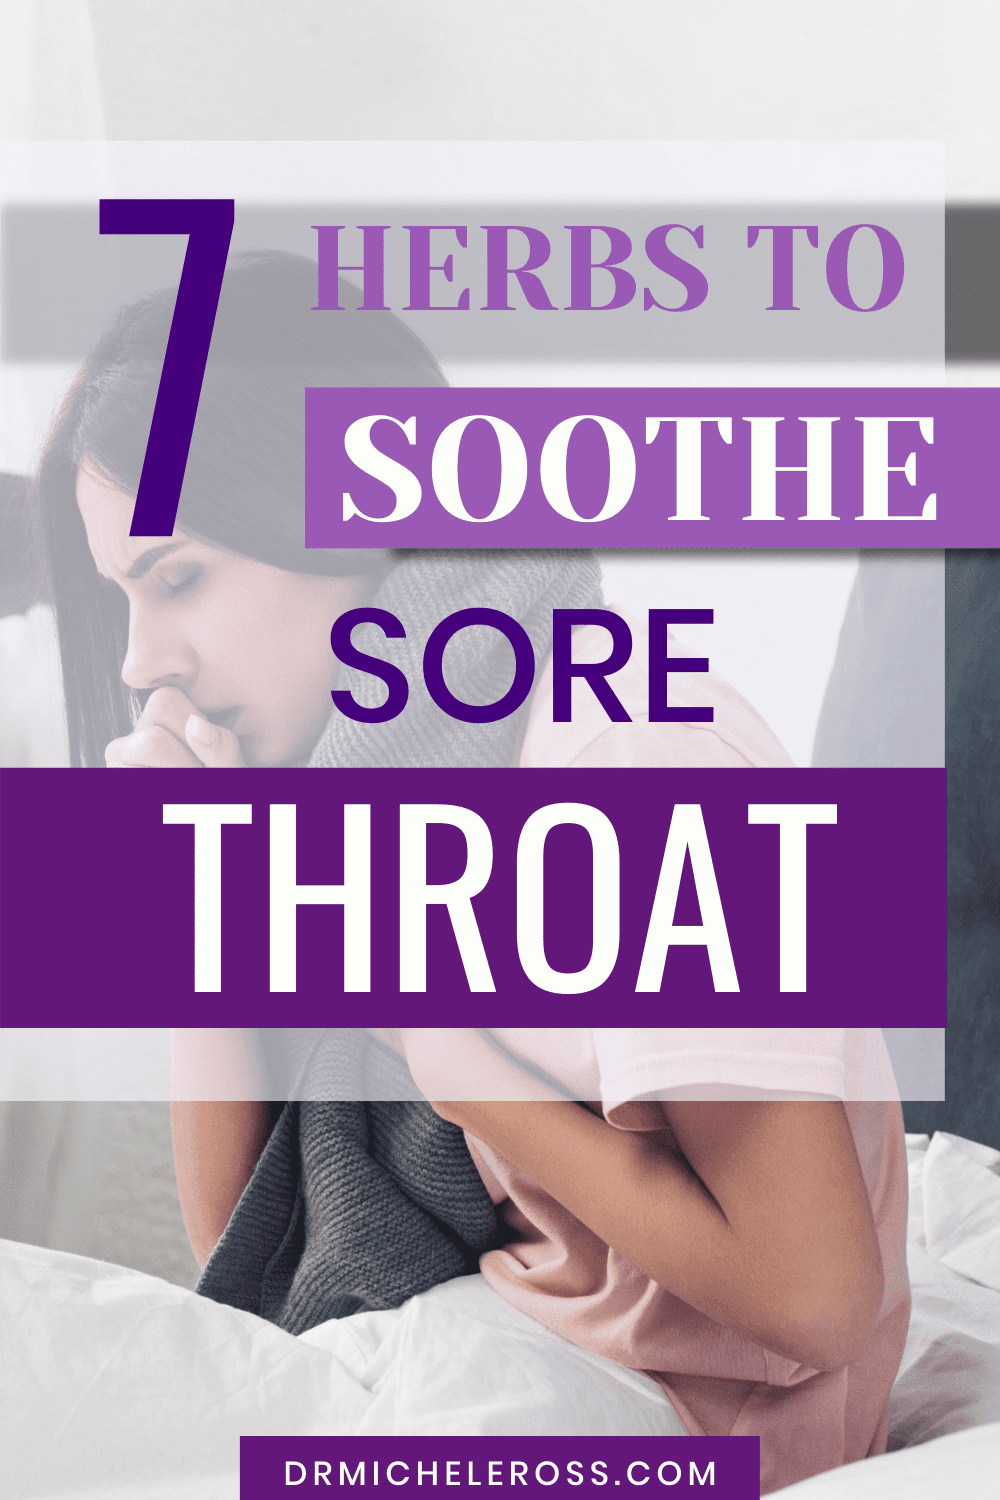 cannabis can help relieve sore throat pain